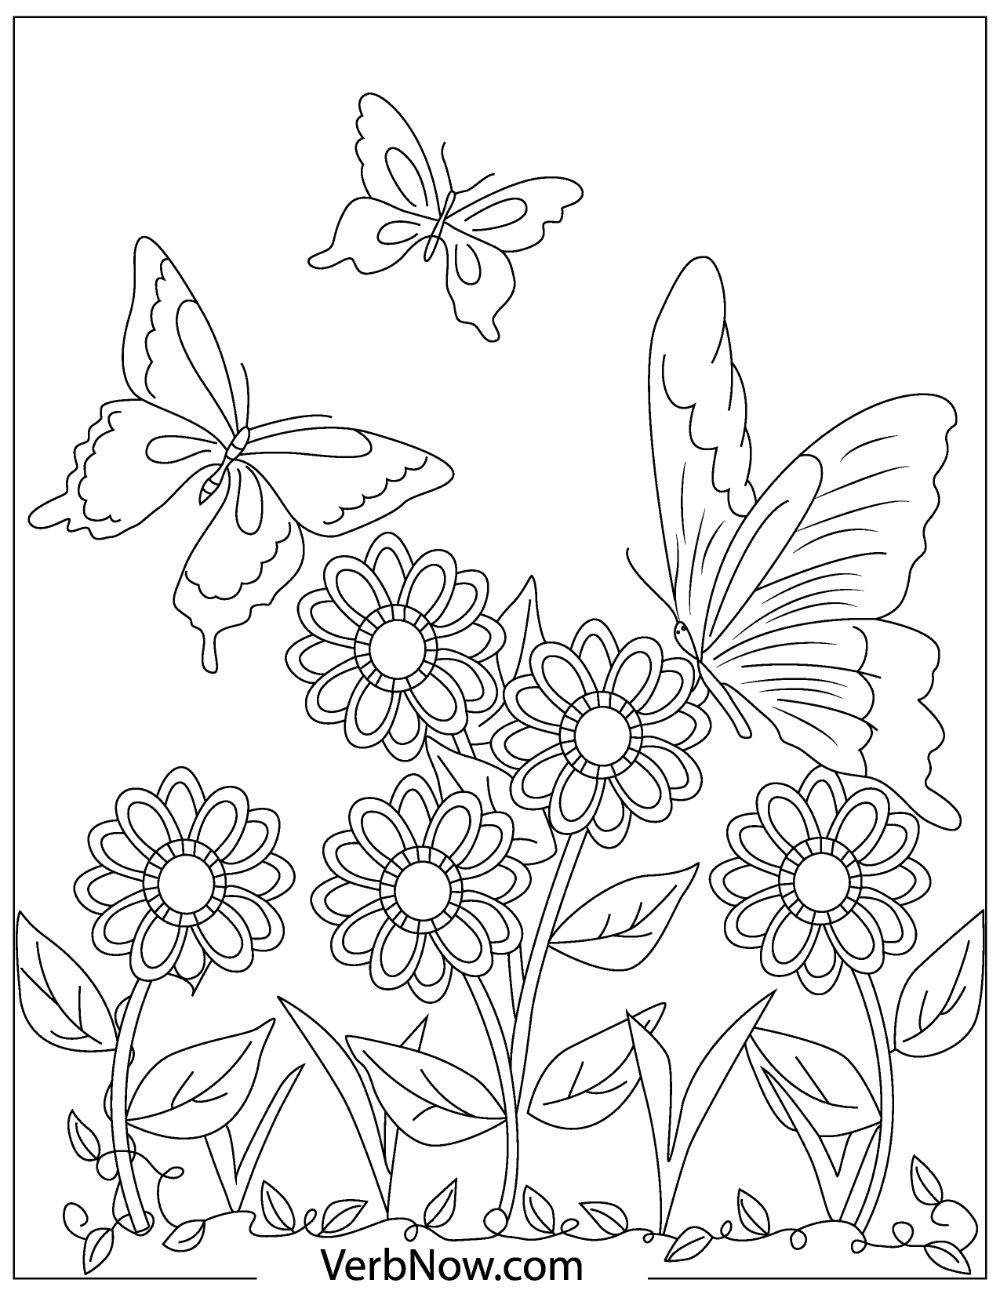 Free butterflies coloring pages for download printable pdf